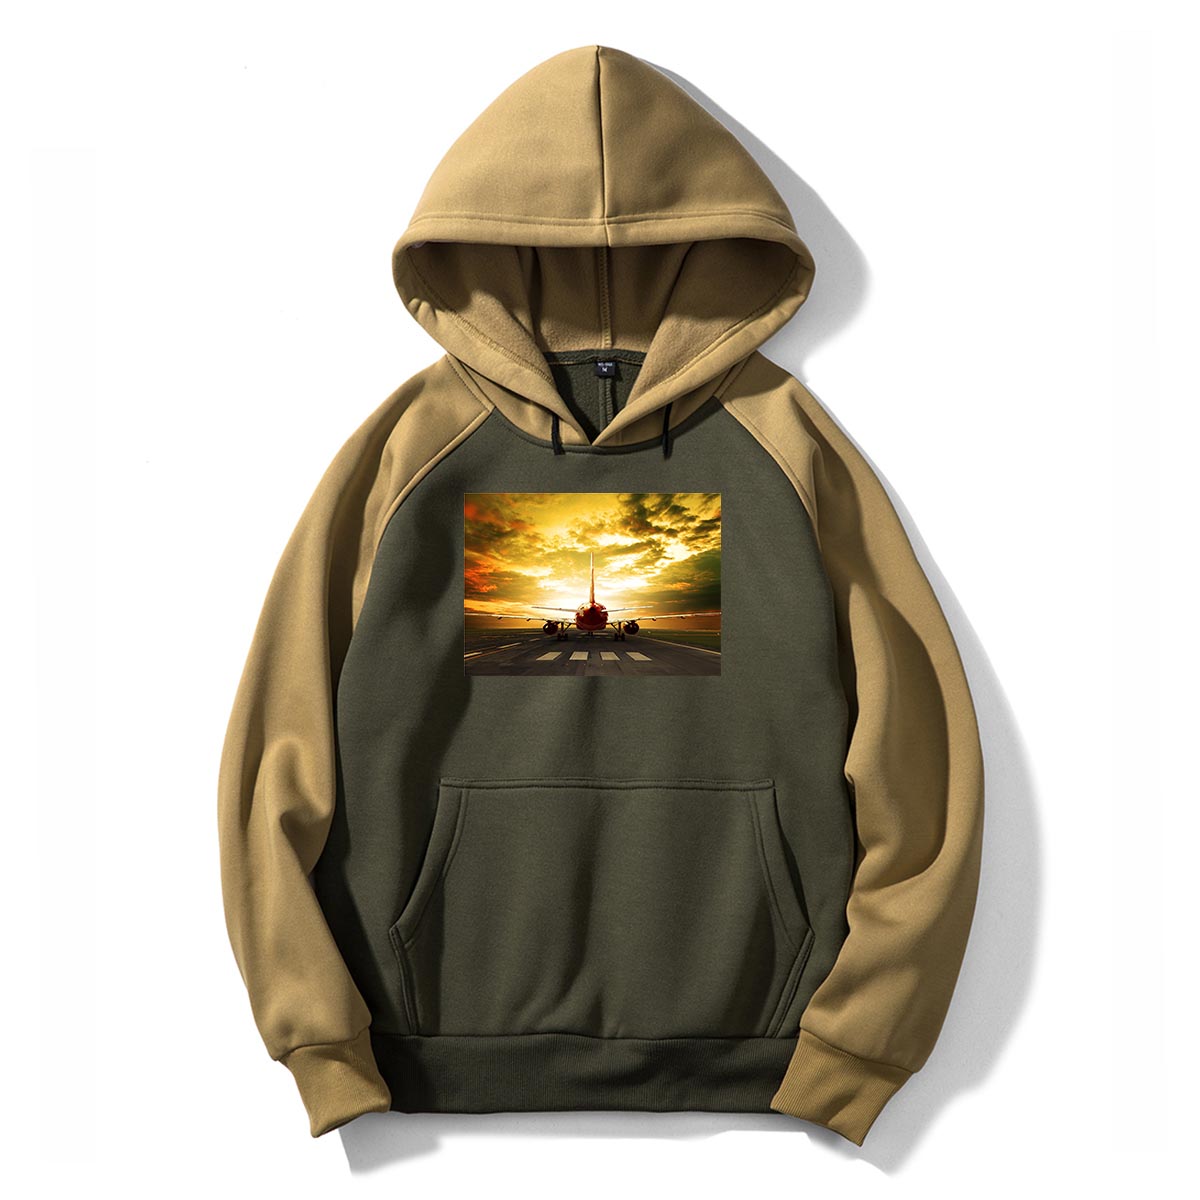 Ready for Departure Passanger Jet Designed Colourful Hoodies